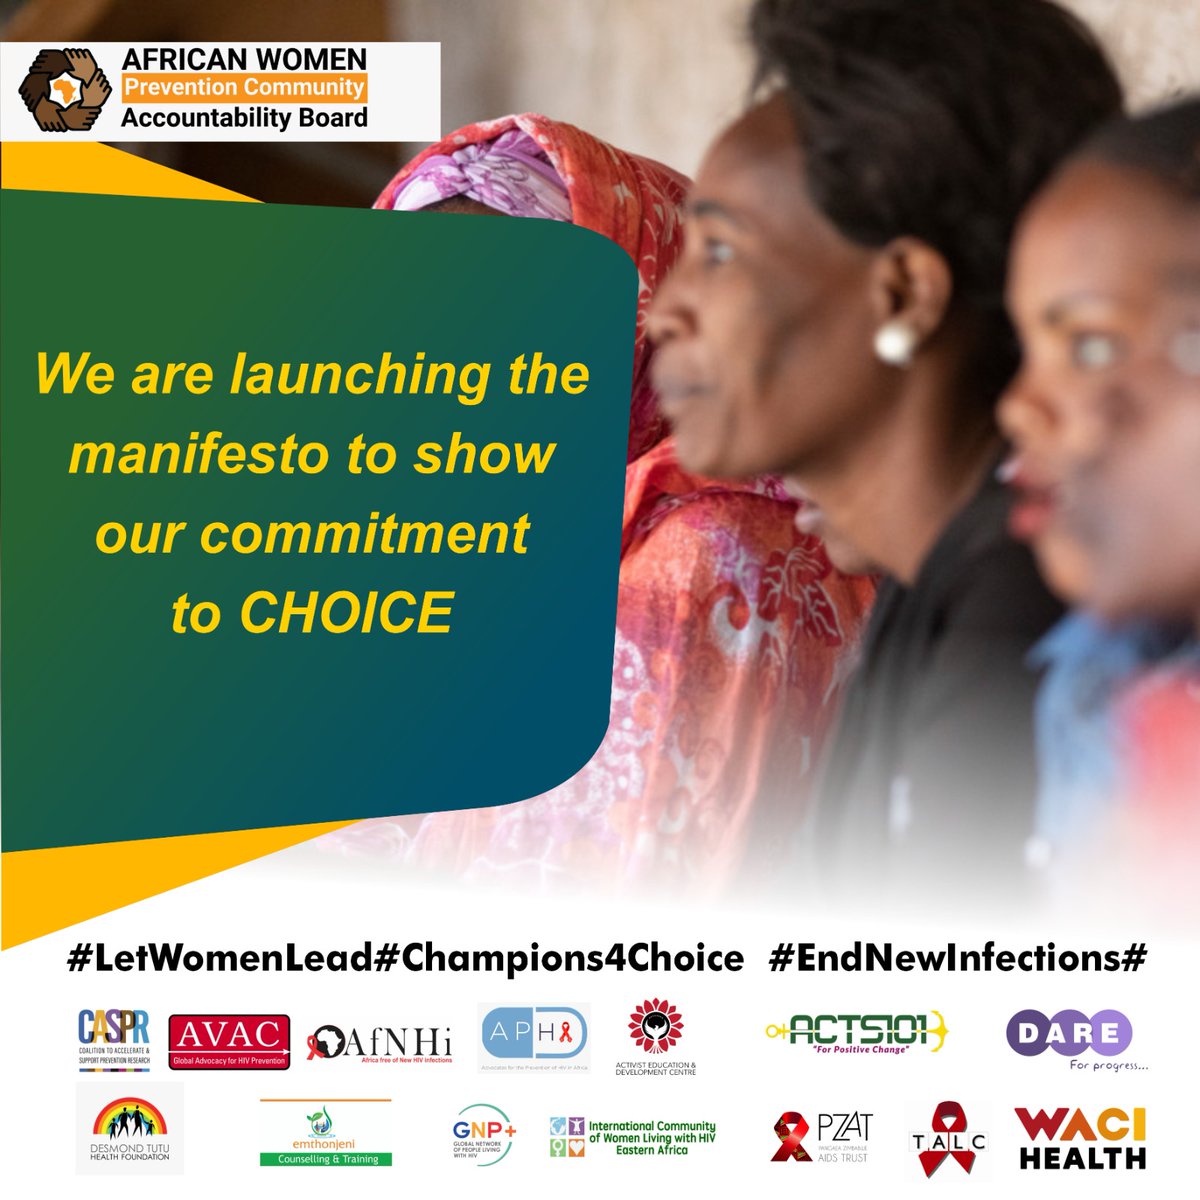 🚀 Exciting News! Join us now, in Kampala, Uganda, as we launch the HIV Prevention #ChoiceManifesto for women and girls in Africa. #Champions4Choice, empowerment, and the right to health and dignity. Let's unite to #EndNewInfections  #FacilitateChoice #LetWomenLead #U4Ptanzania